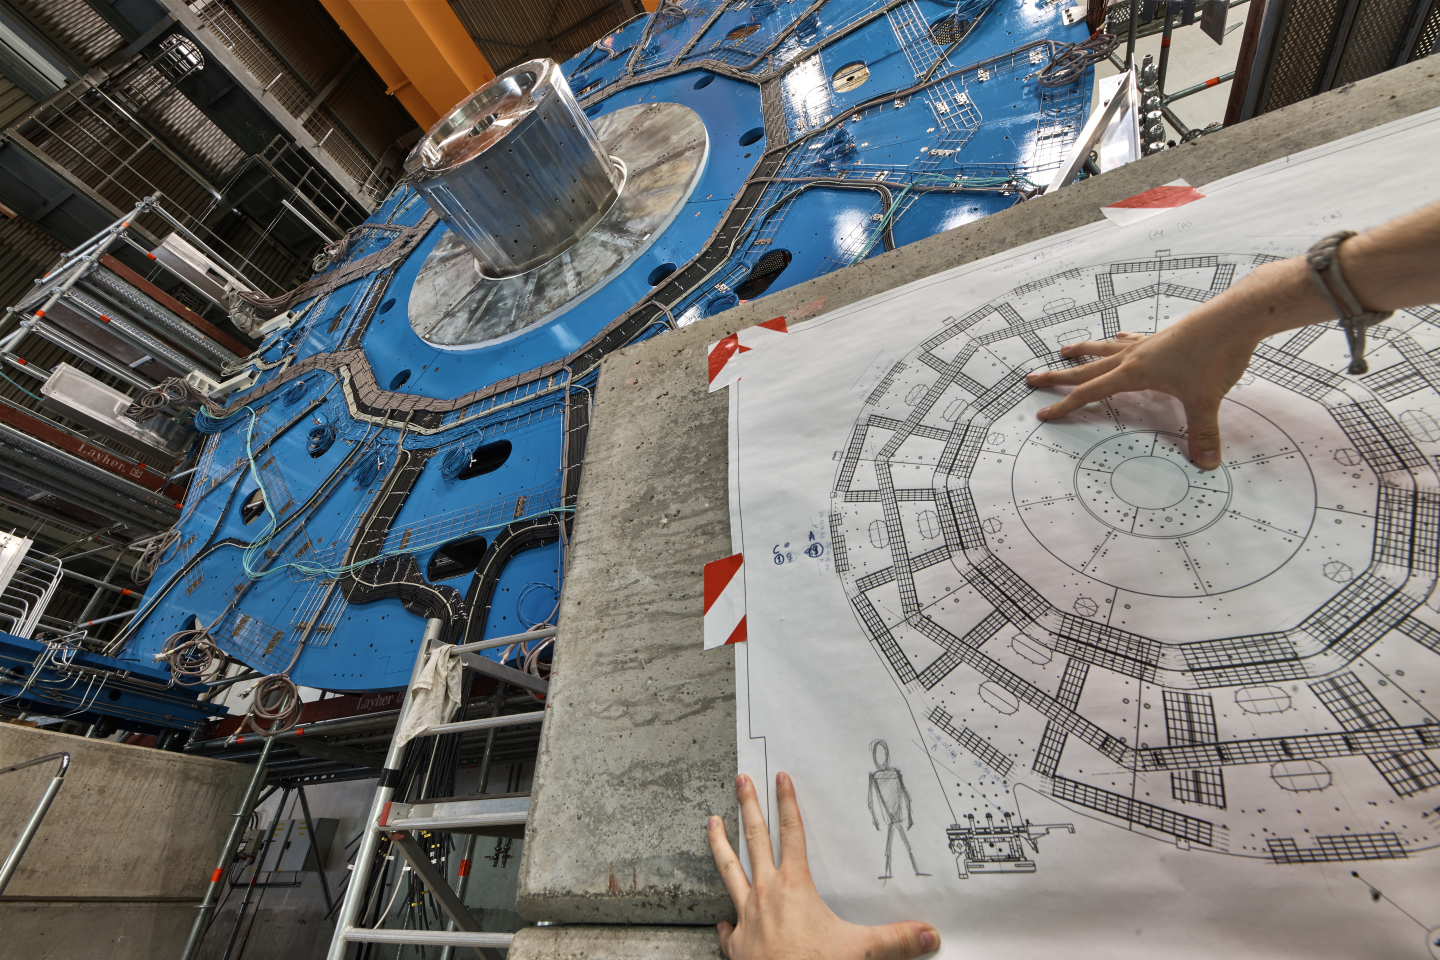 Photo - A new wheel-shaped muon detector is part of the ATLAS detector upgrade at CERN. This wheel-shaped detectors measures more than 30 feet in diameter. (Credit: Julien Marius Ordan/CERN)